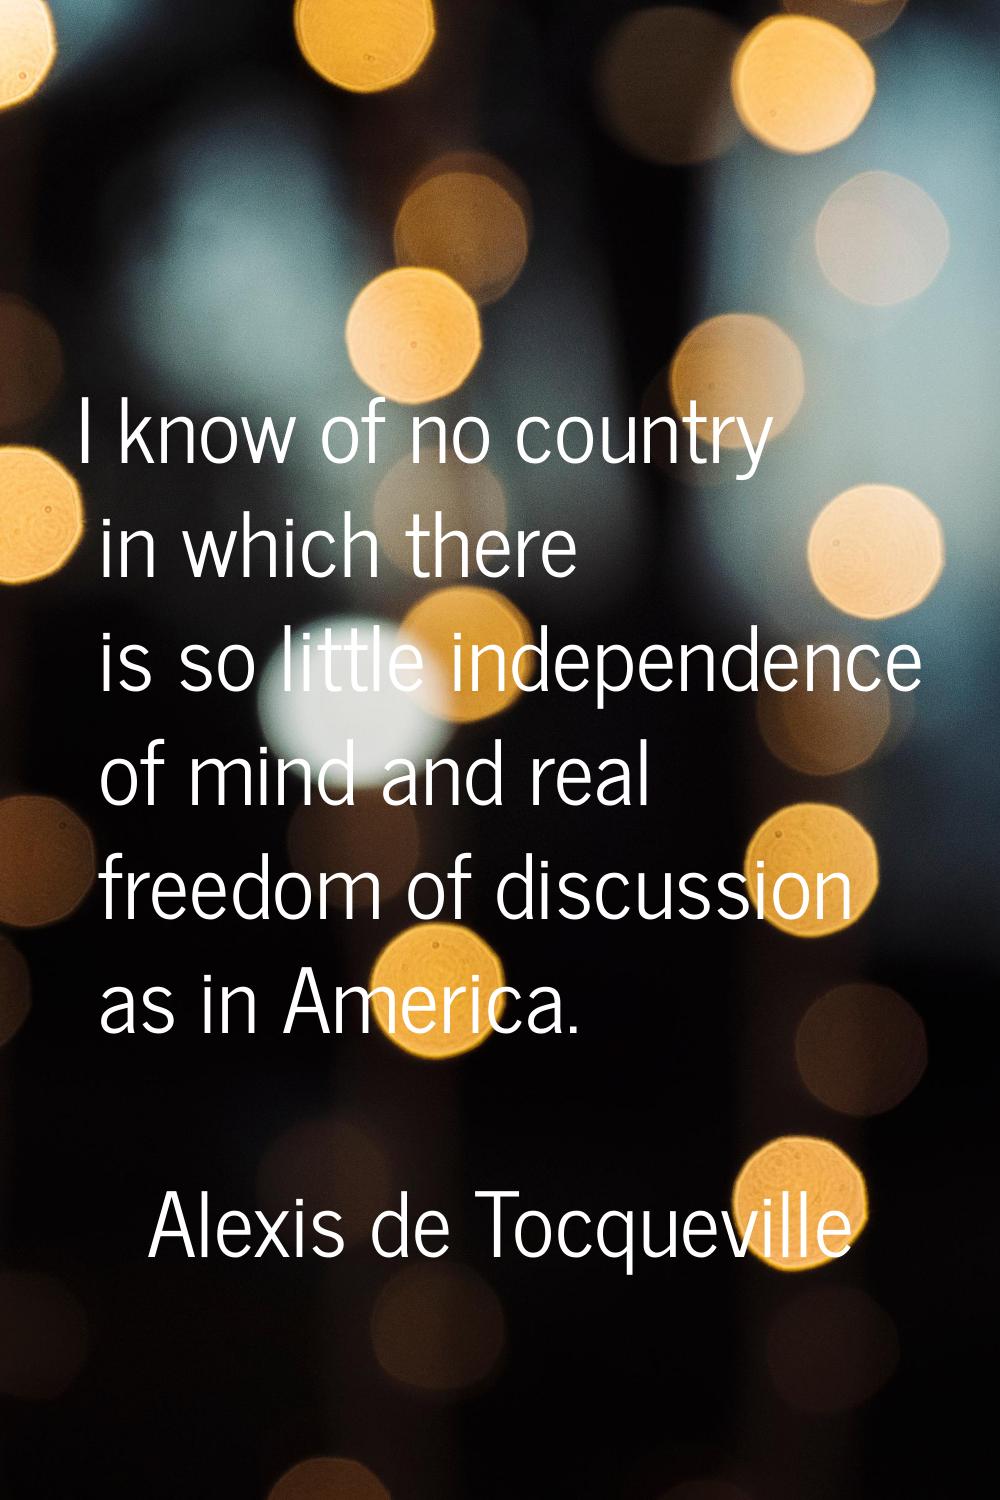 I know of no country in which there is so little independence of mind and real freedom of discussio